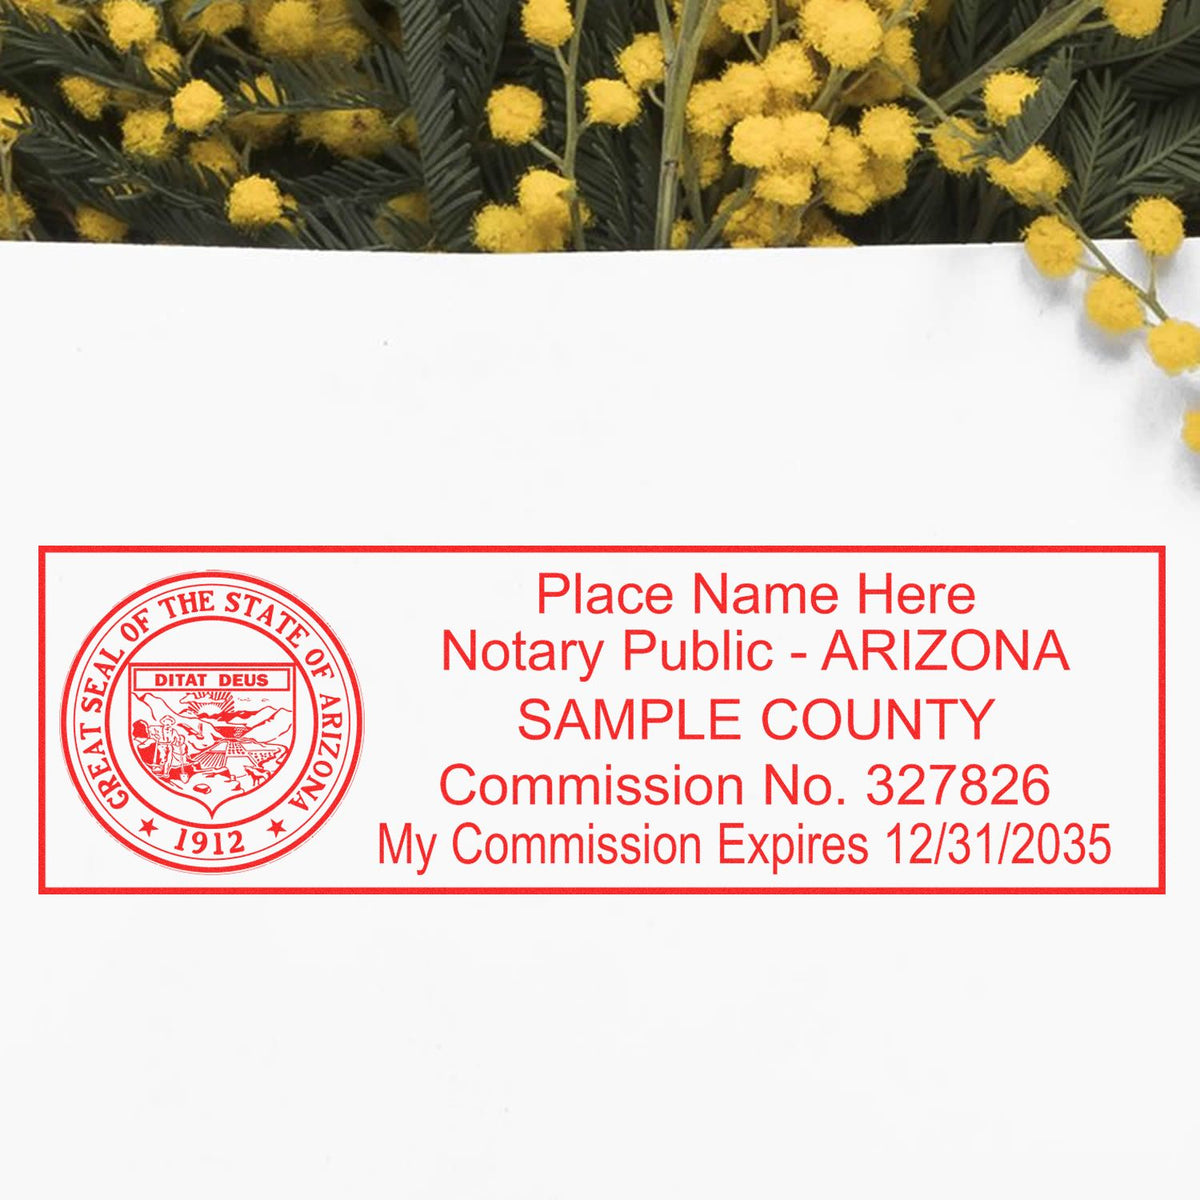 The Heavy-Duty Arizona Rectangular Notary Stamp stamp impression comes to life with a crisp, detailed photo on paper - showcasing true professional quality.